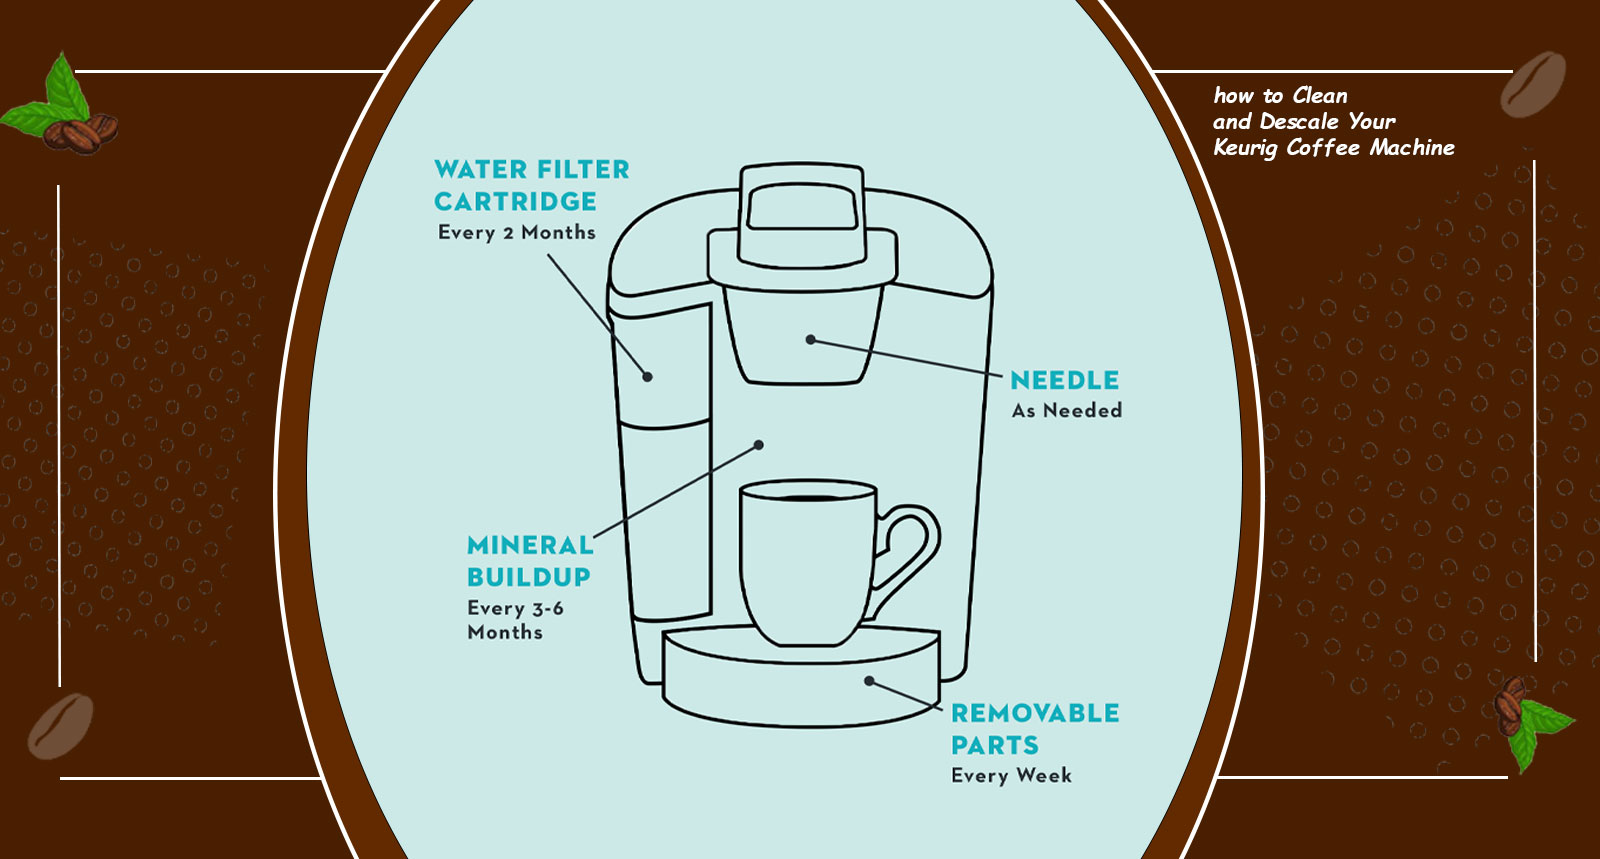 how to Clean and Descale Your Keurig Coffee Machine